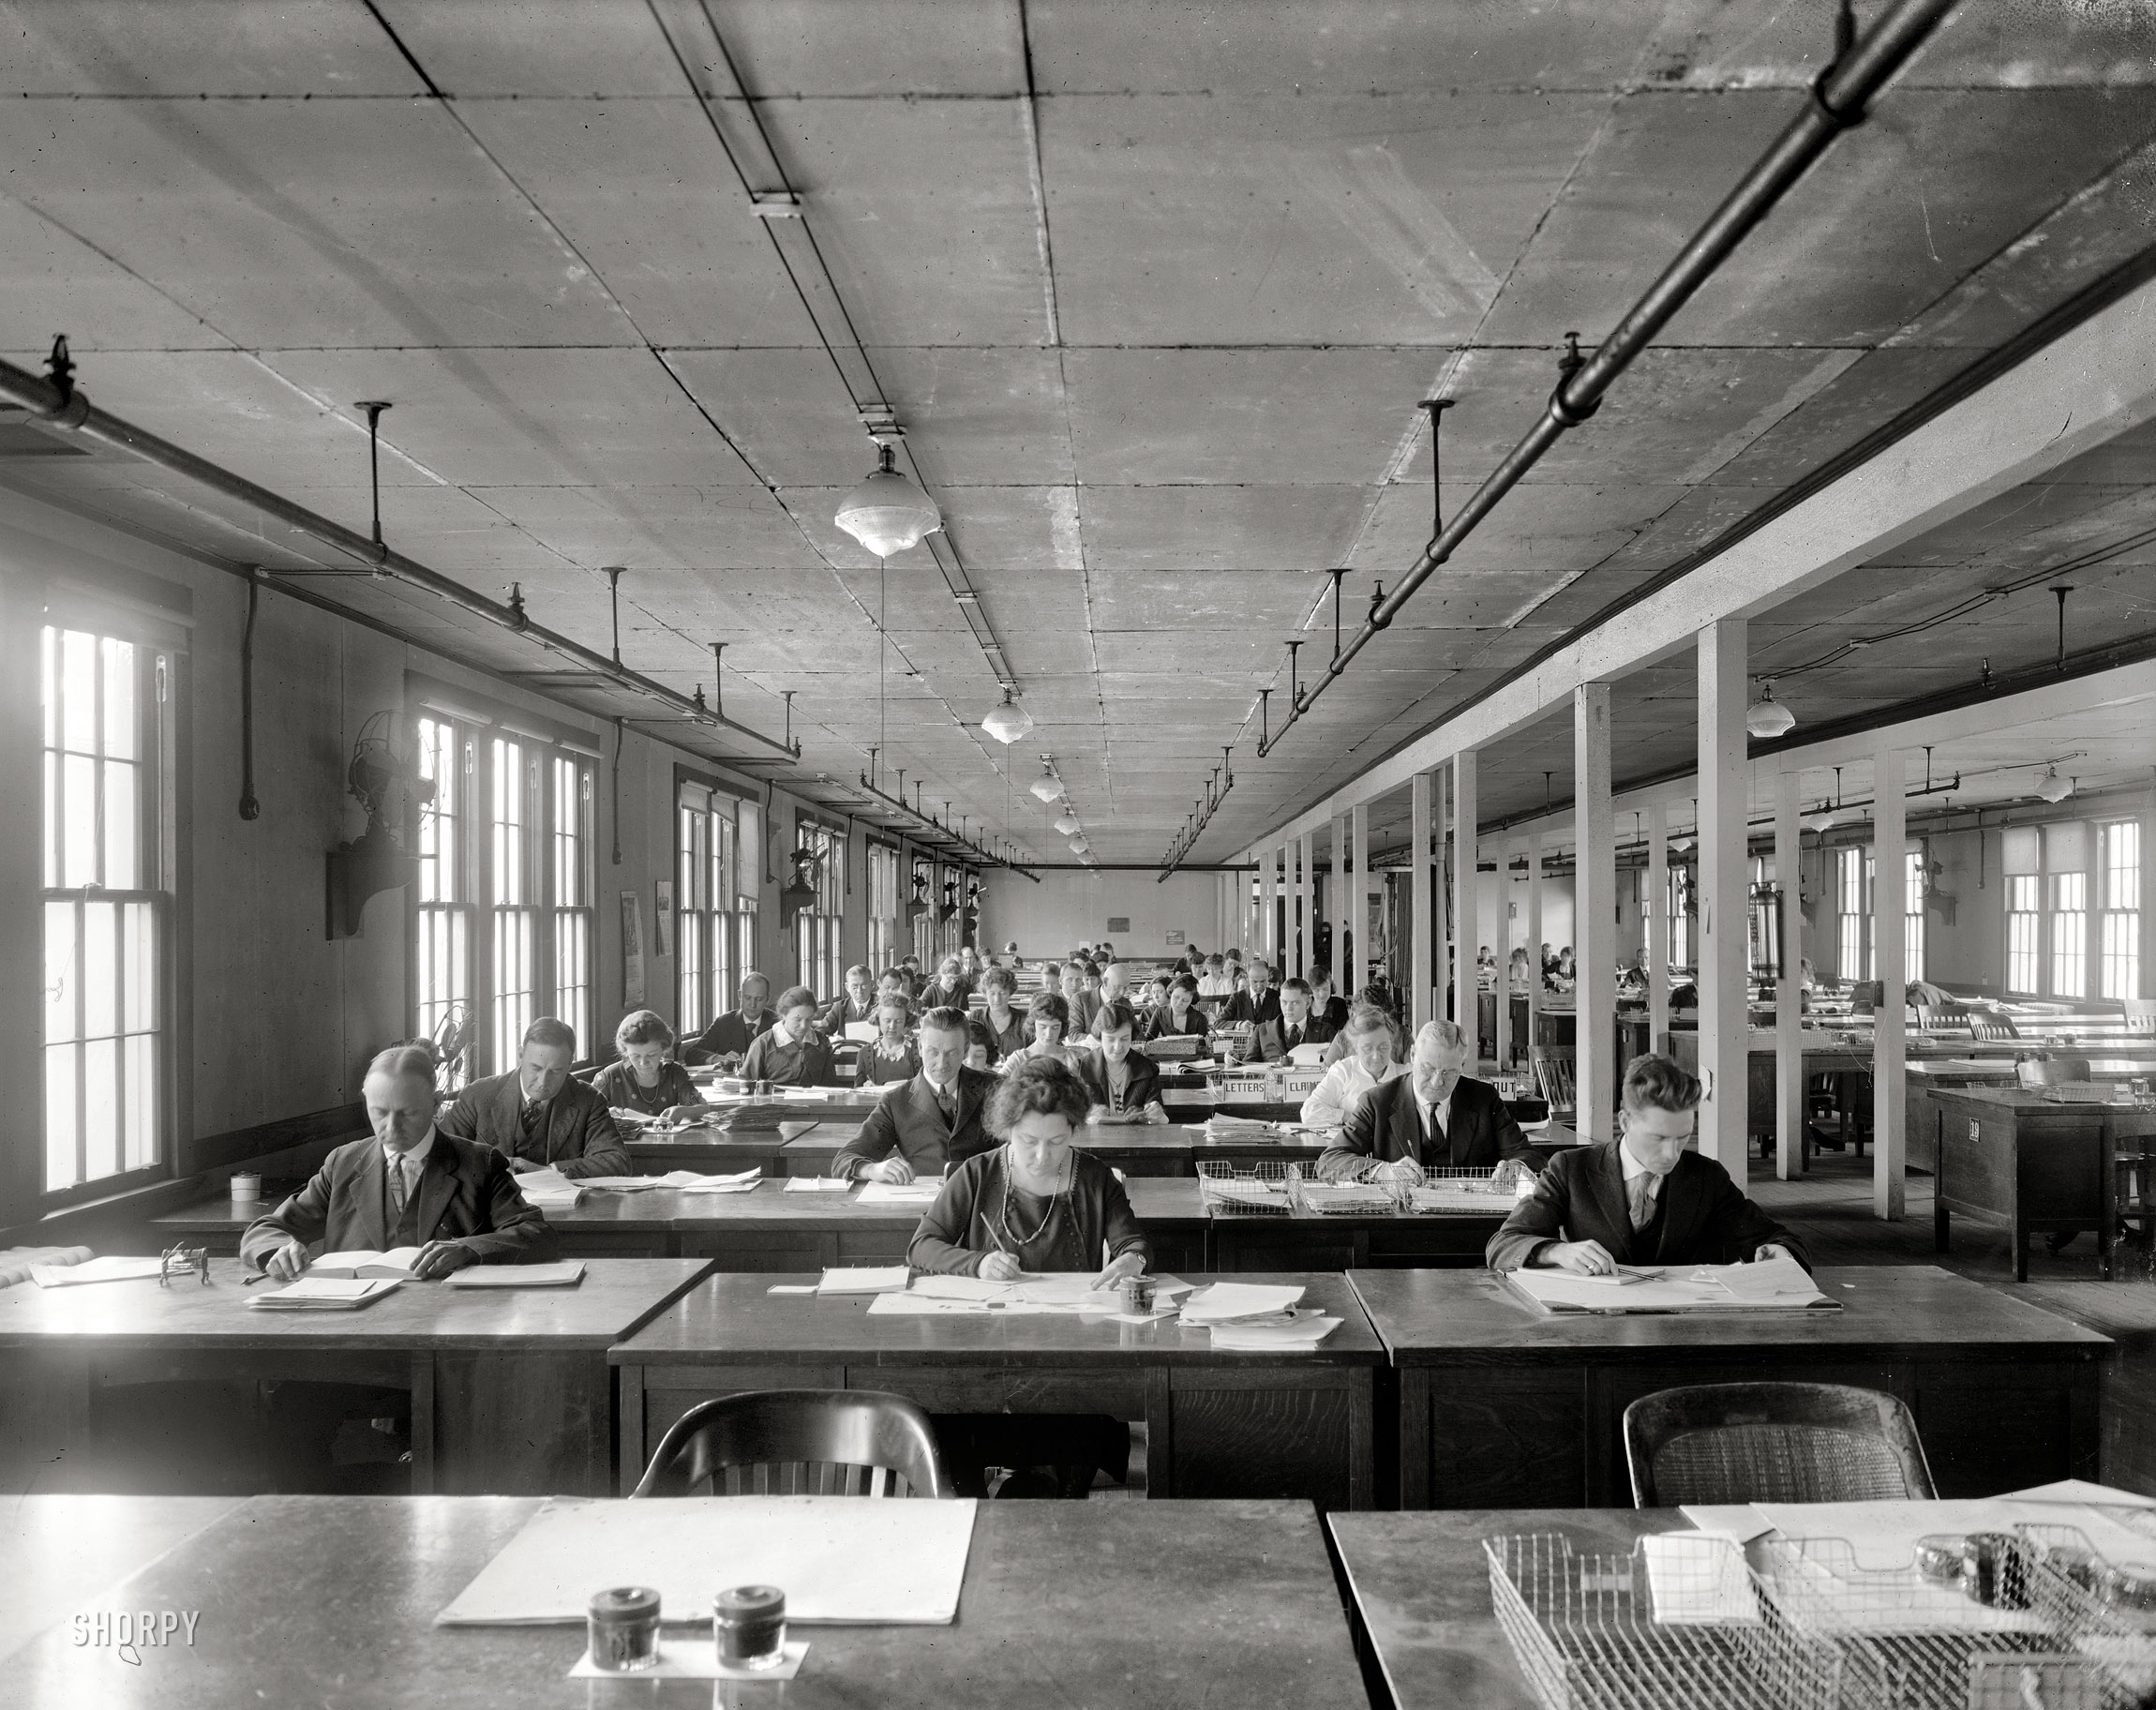 Washington, D.C., circa 1920. "Internal Revenue income tax story." National Photo Company Collection glass negative. View full size.